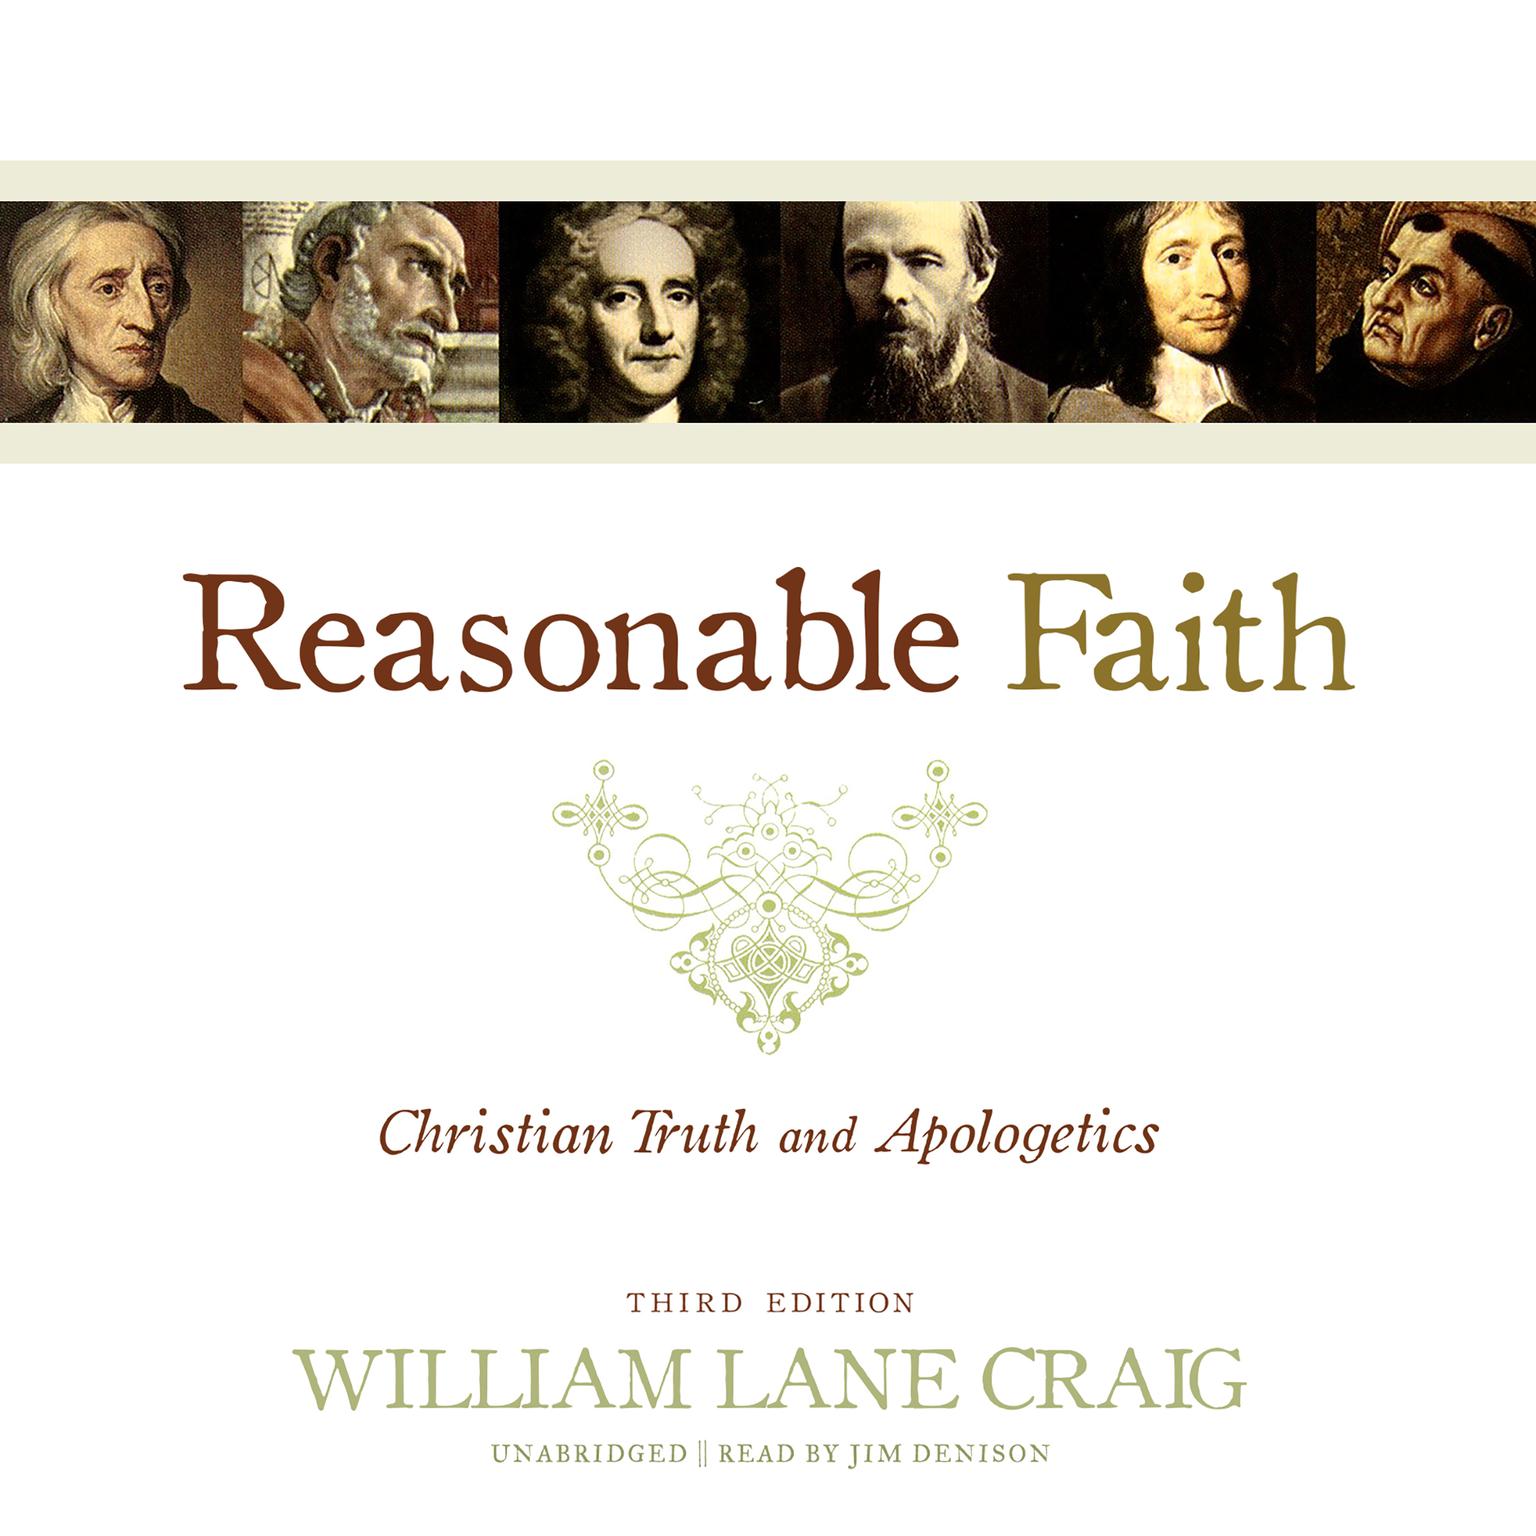 Reasonable Faith, Third Edition: Christian Truth and Apologetics Audiobook, by William Lane Craig